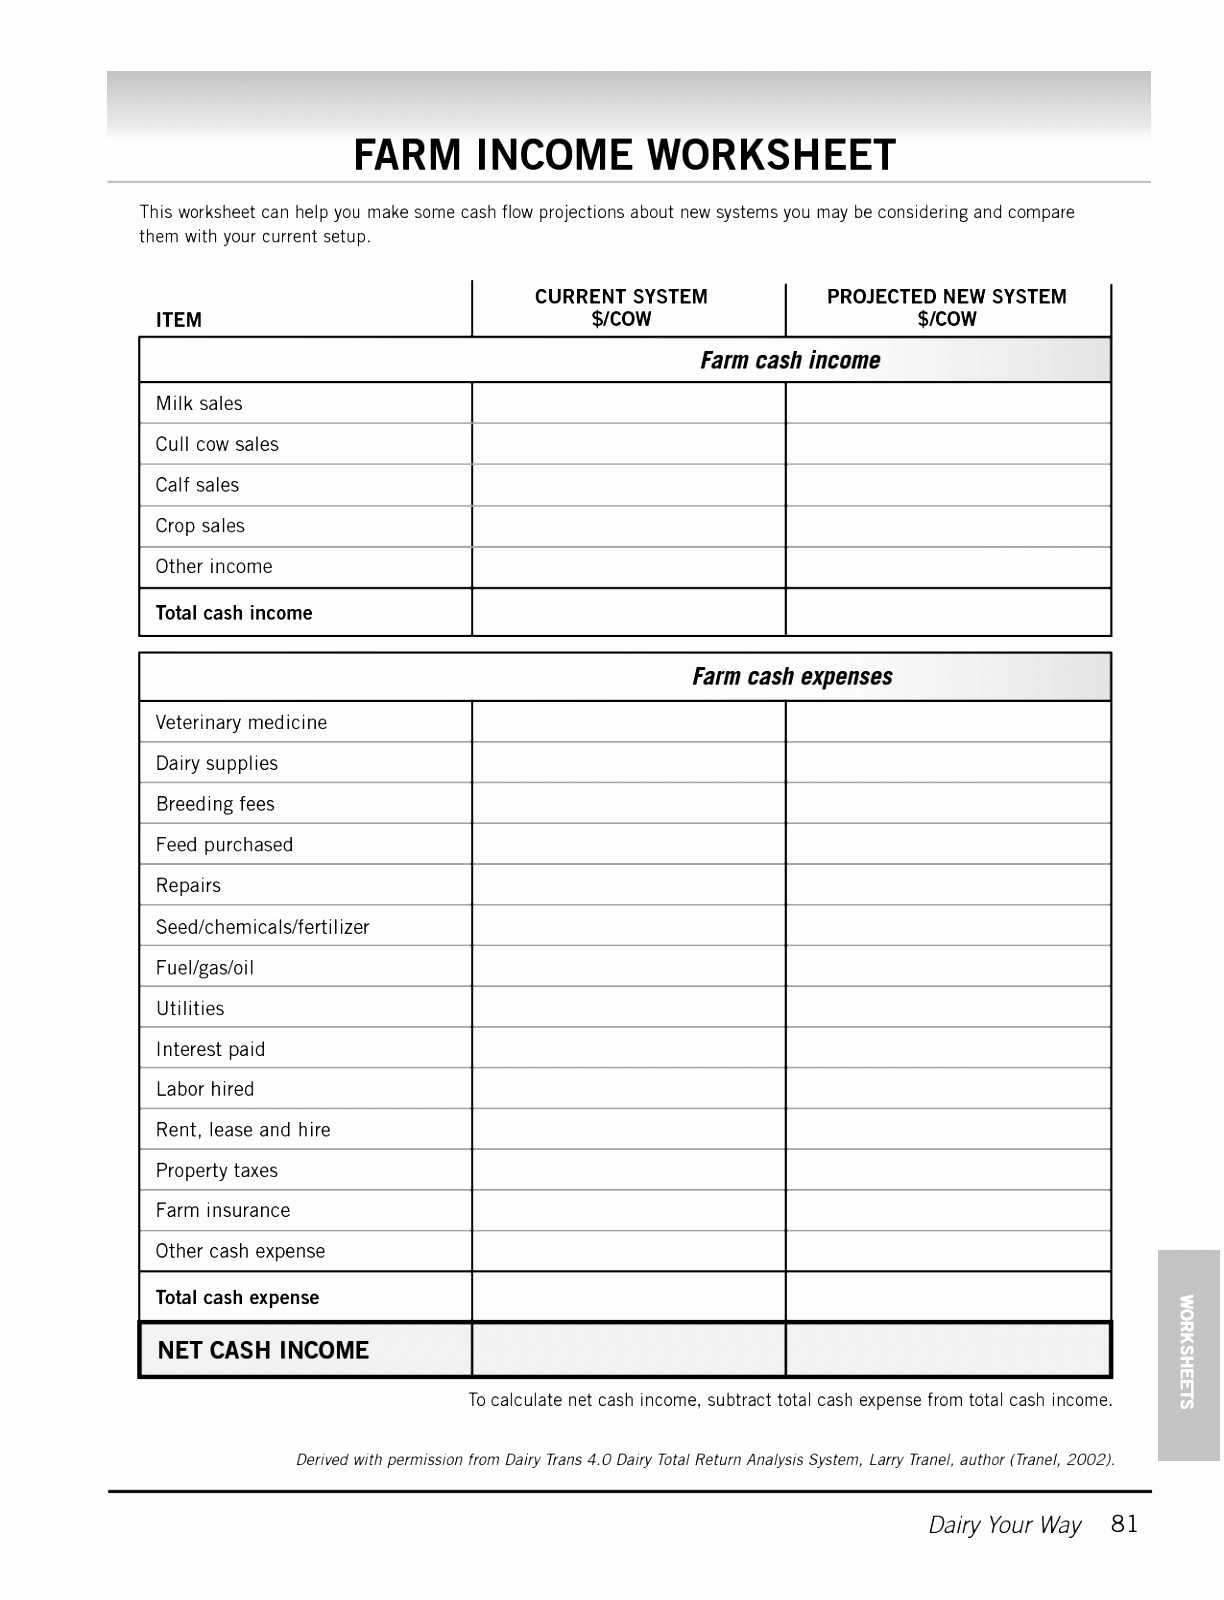 Free Cattle Record Keeping Spreadsheet Inspirational Document Farm